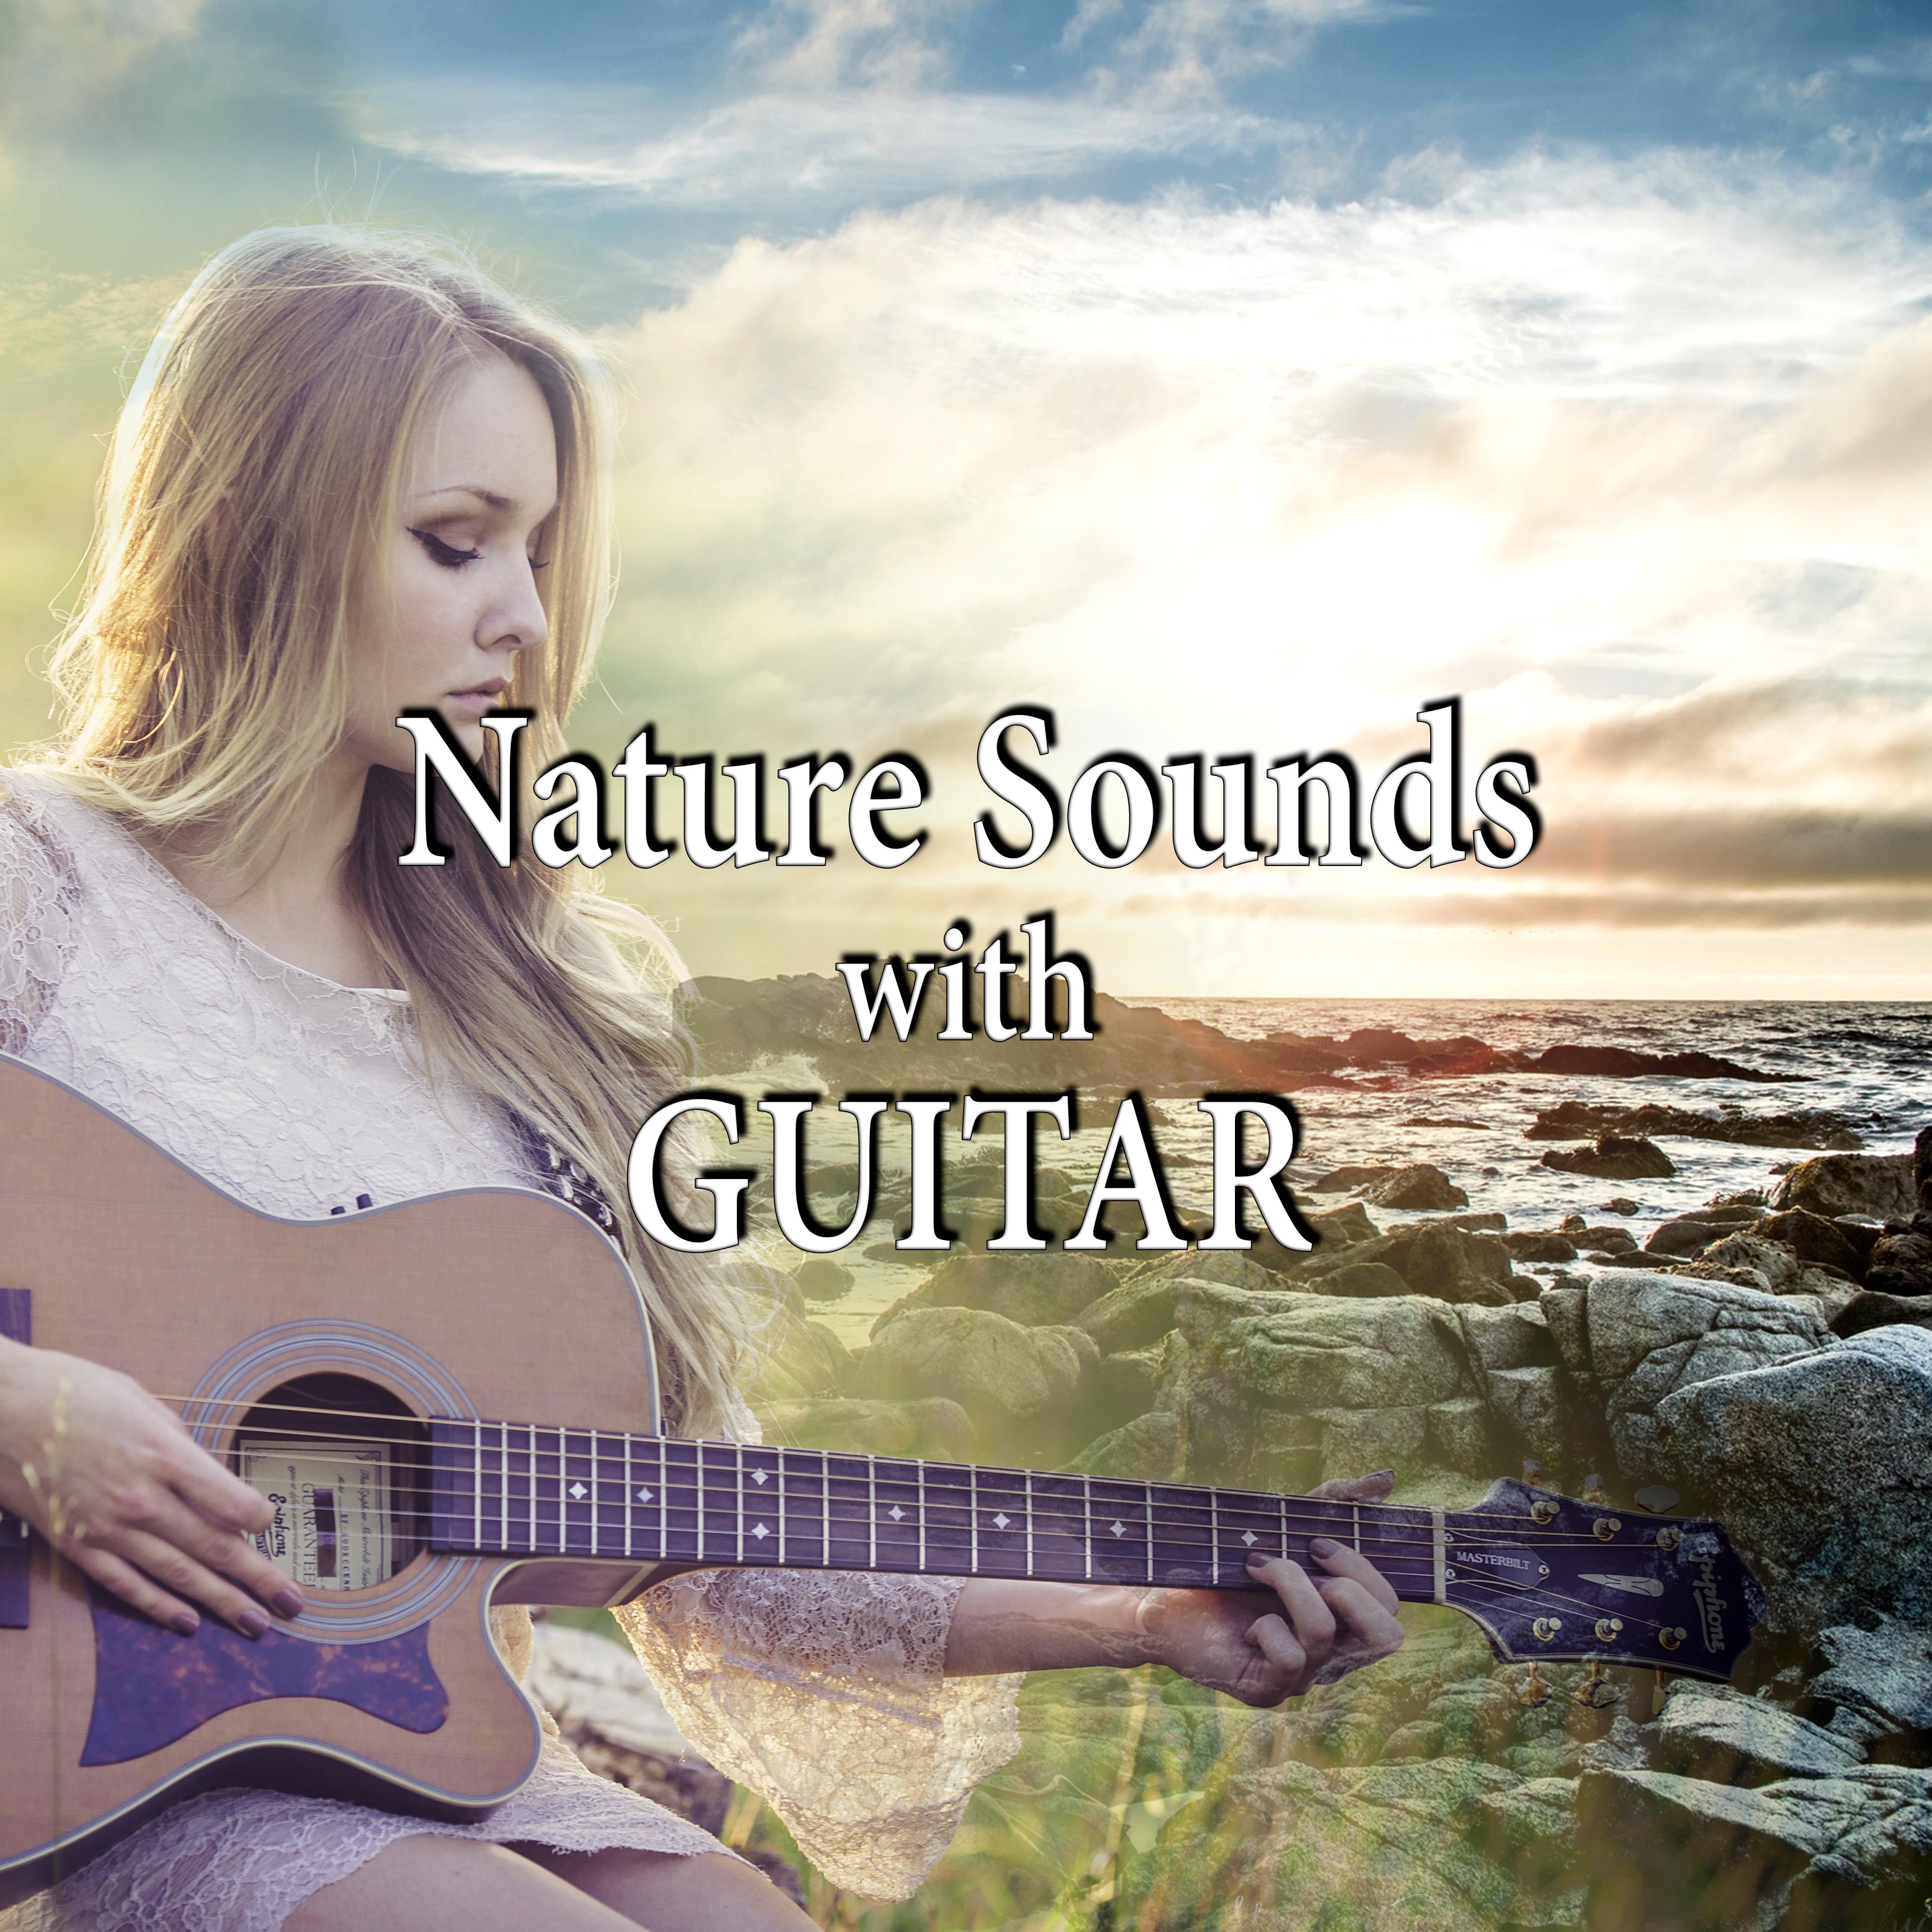 Nature Sounds with Guitar – Relaxing Guitar Songs for Meditation, Reiki, Easy Listening, Massage, Balancing with Nature Music